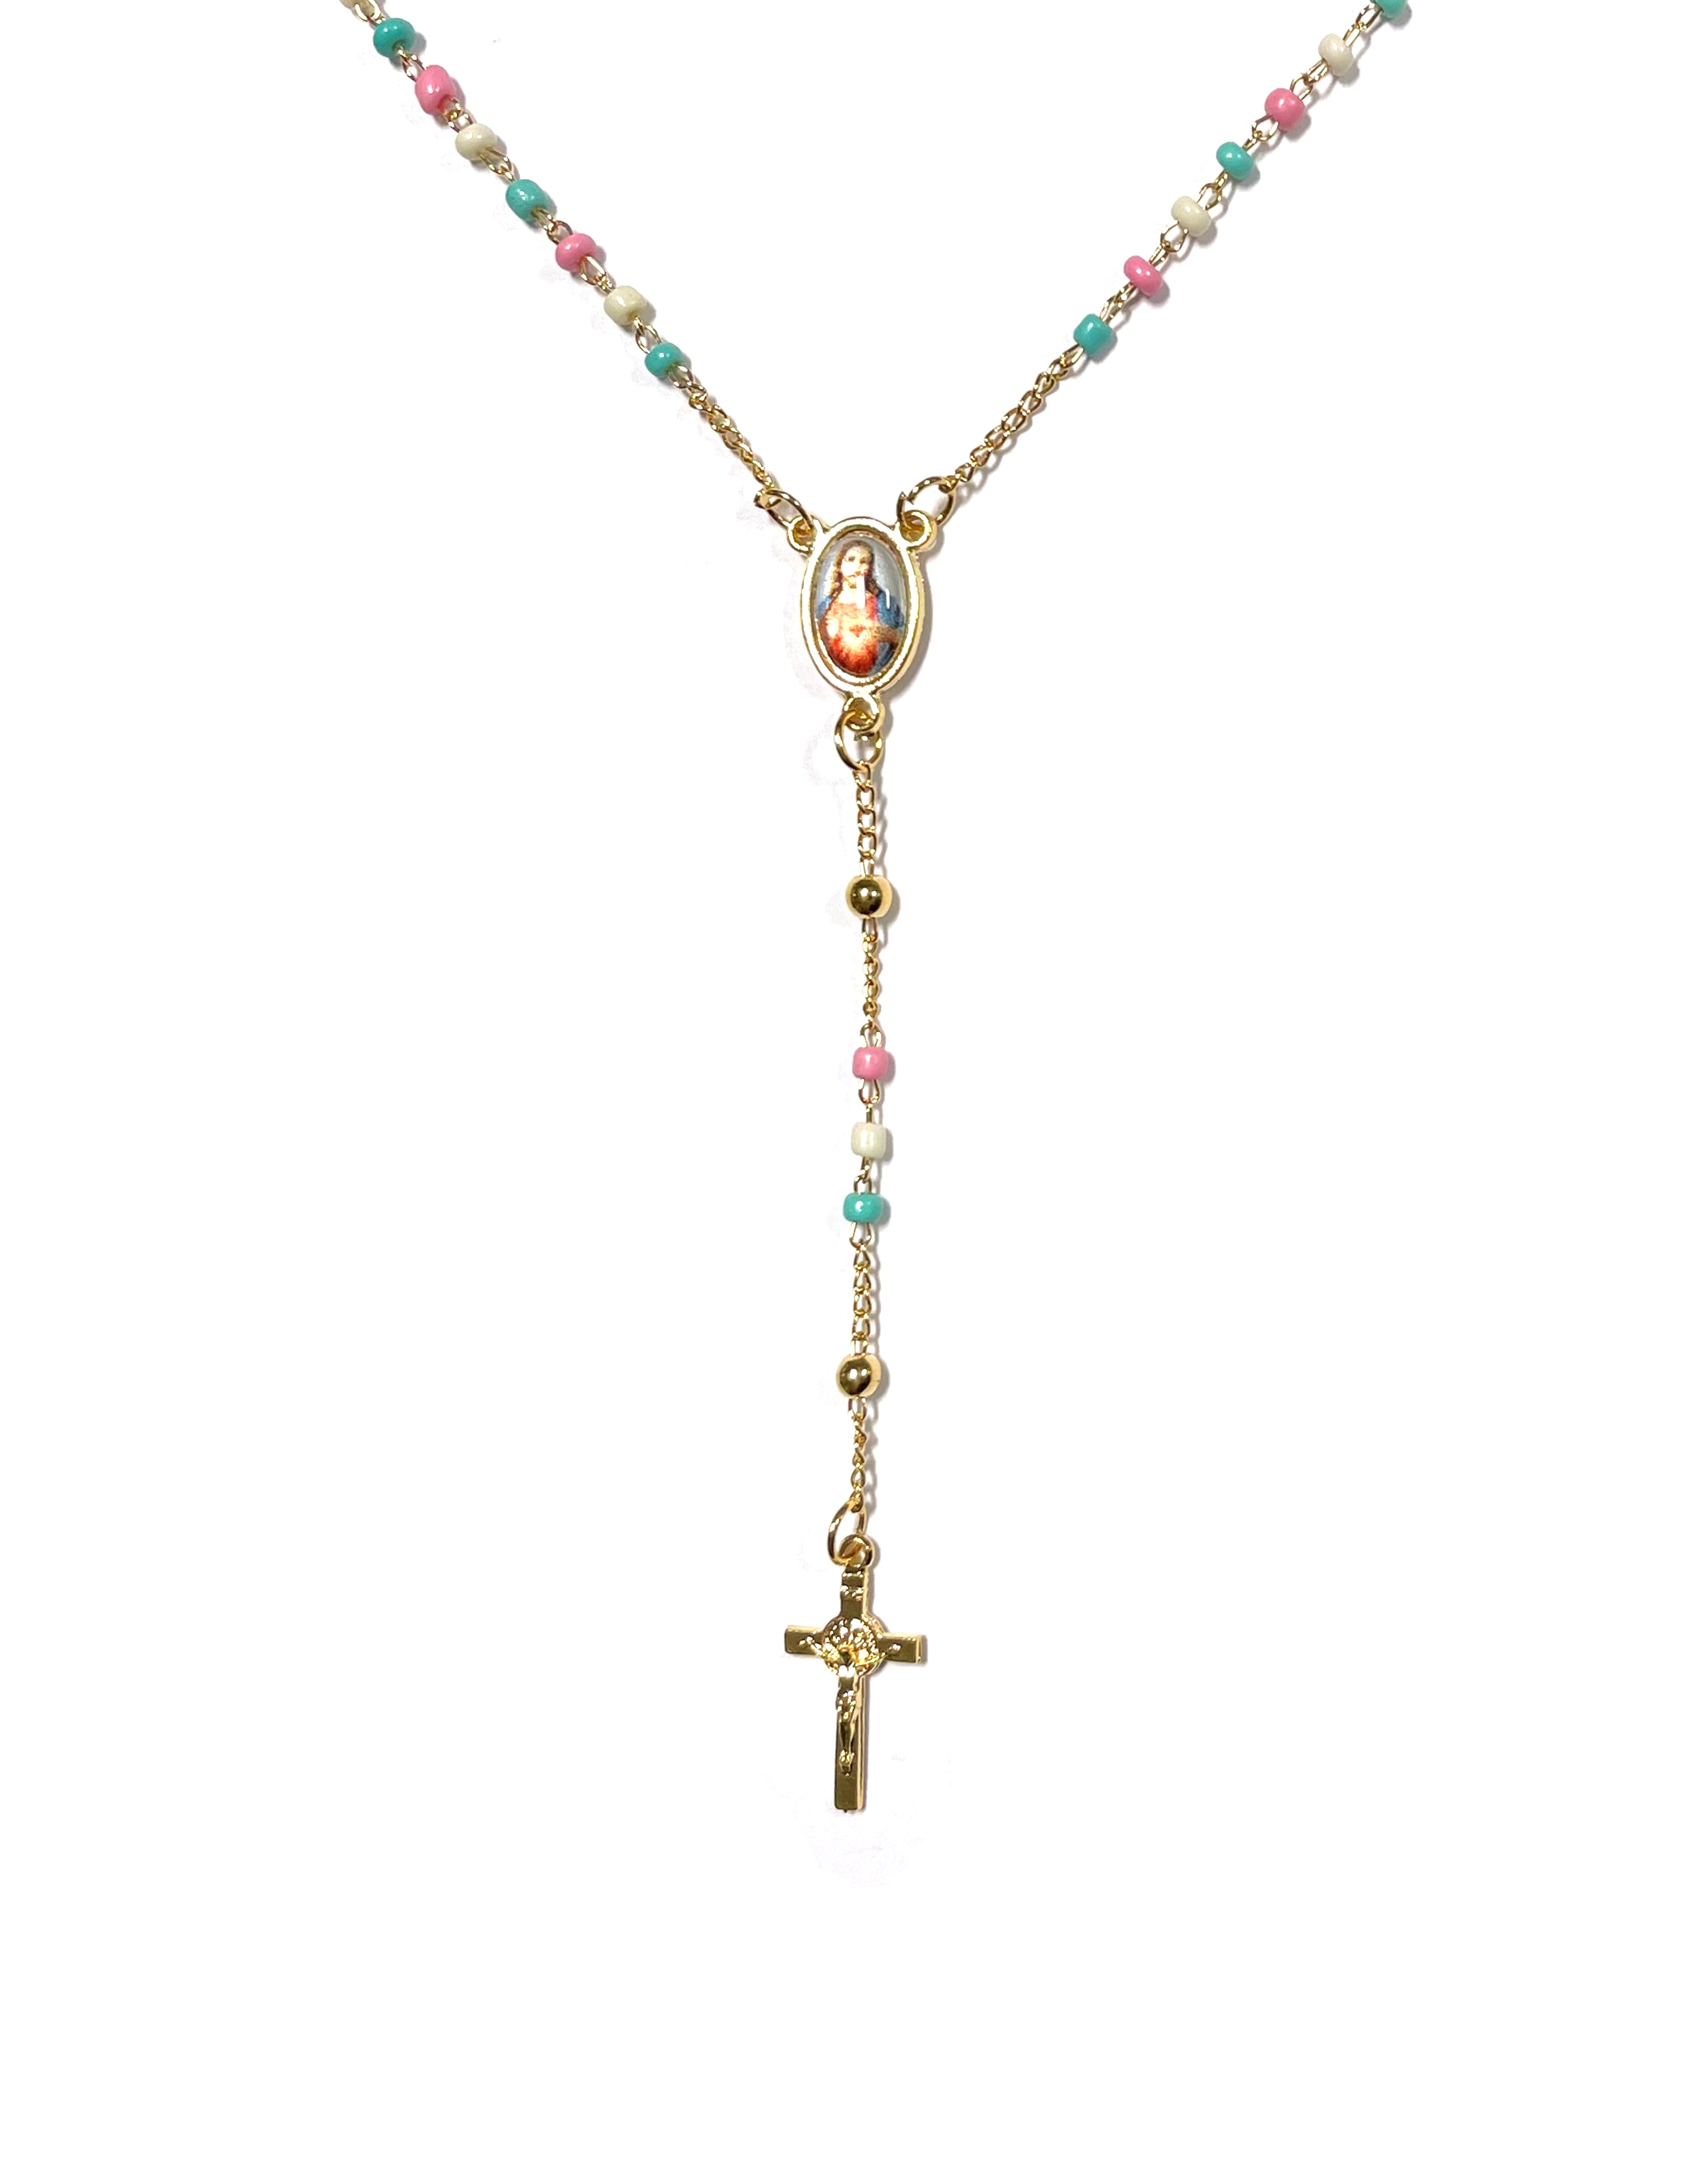 Golden rosary with chain-style colored beads